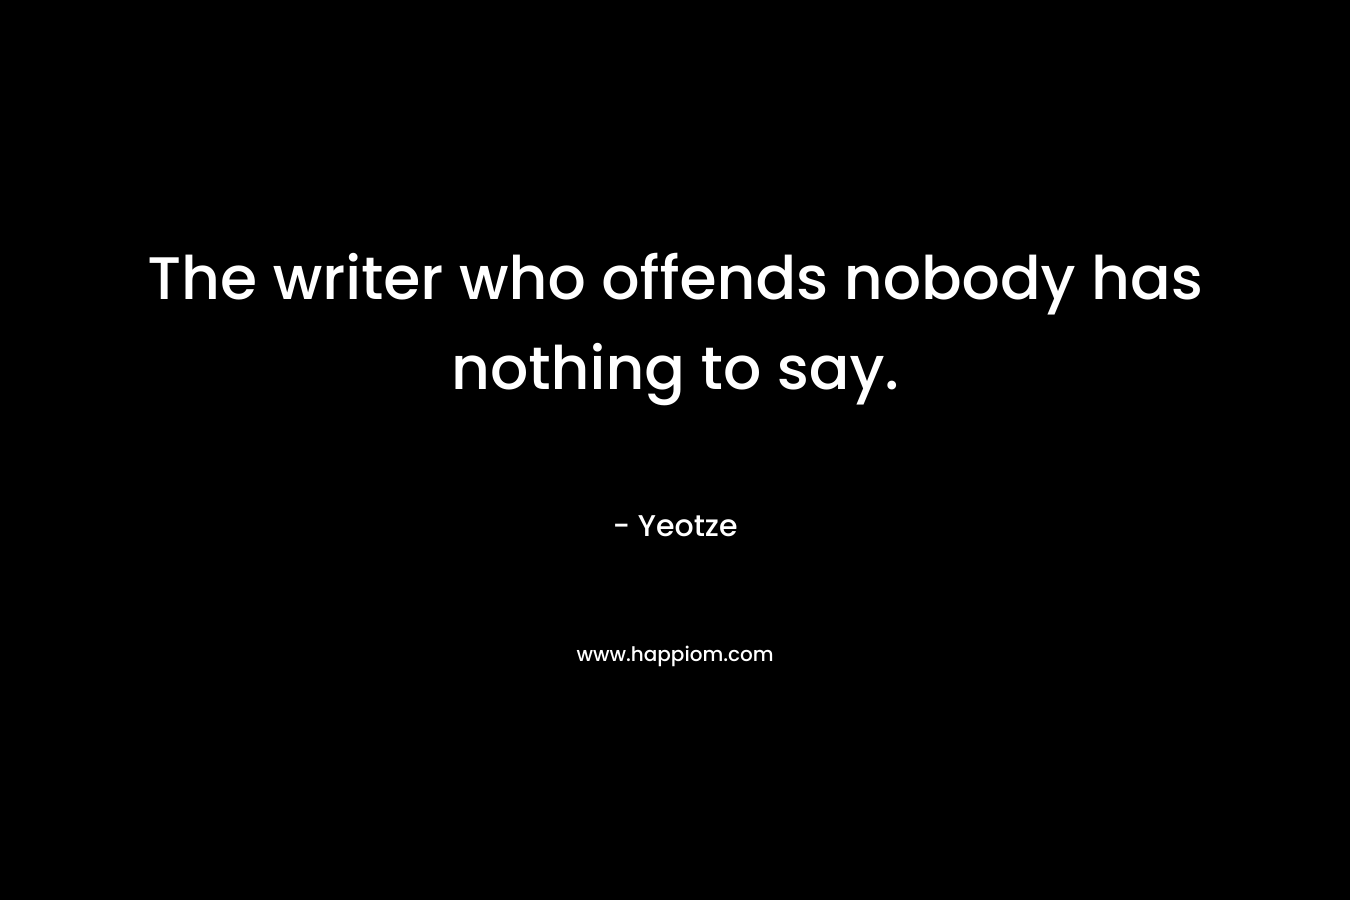 The writer who offends nobody has nothing to say. – Yeotze